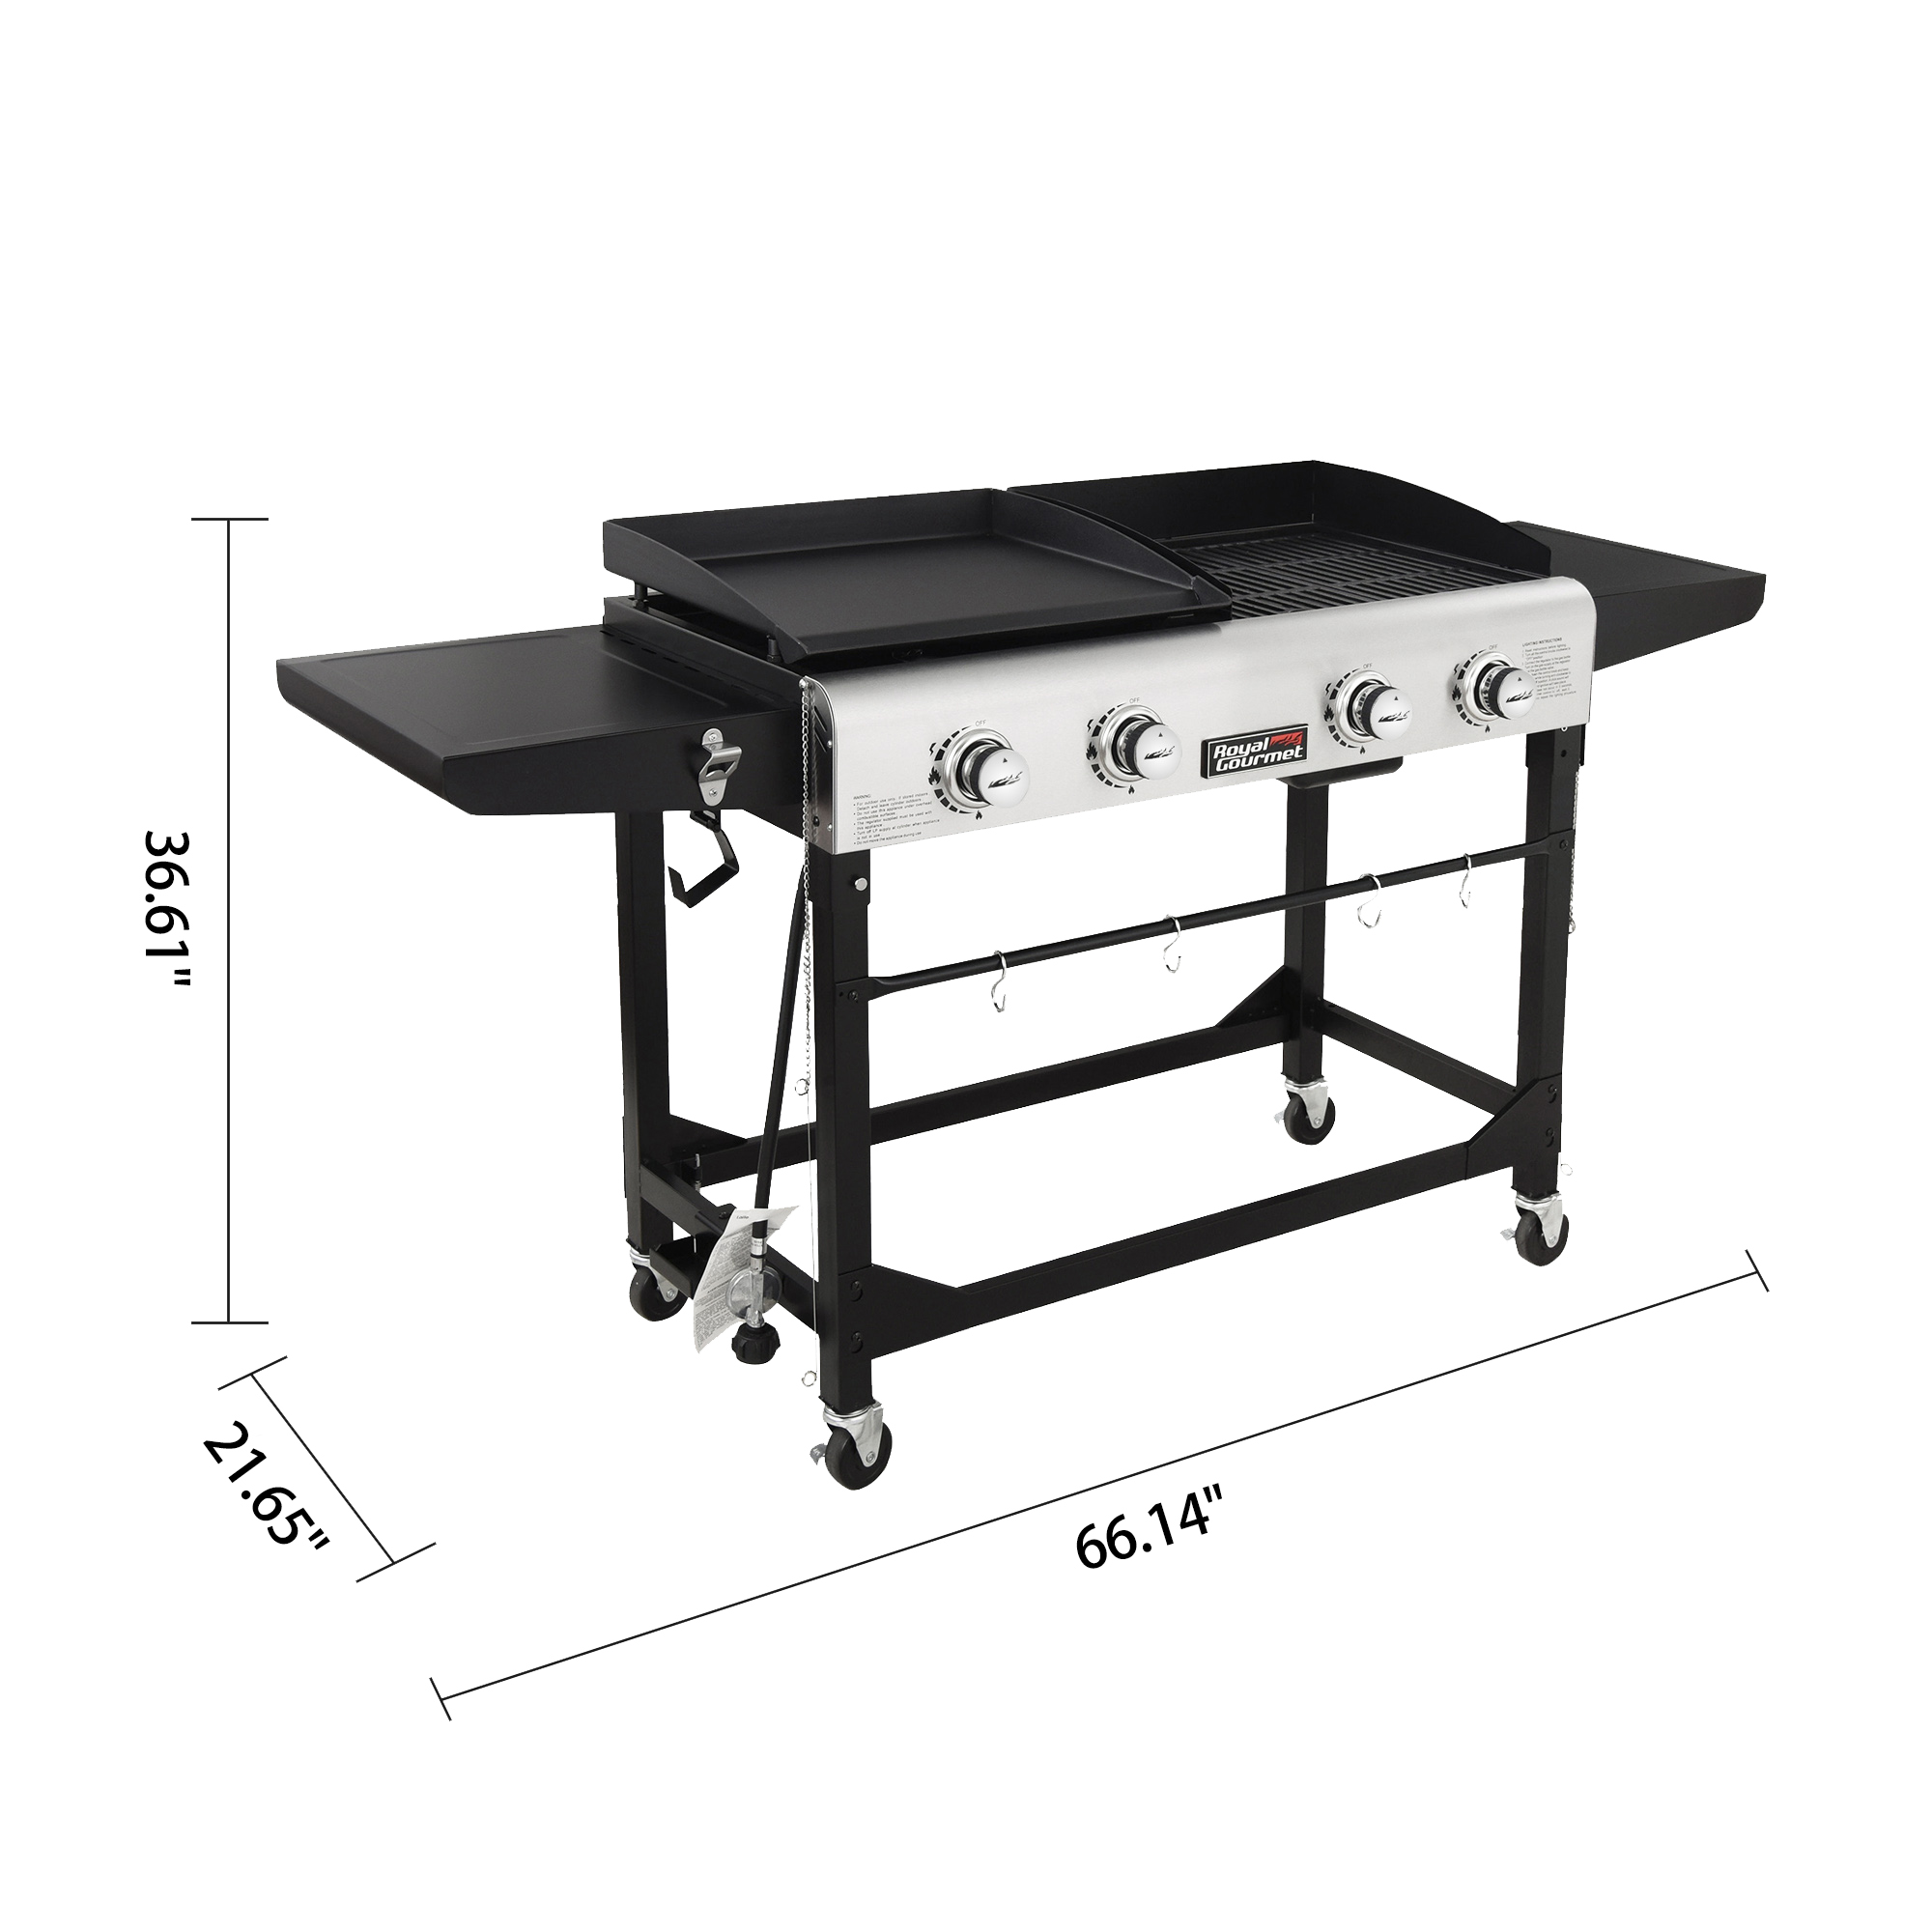 Royal Gourmet 4-Burner GD401 Portable Flat Top Gas Grill and Griddle Combo with Folding Legs - image 3 of 9